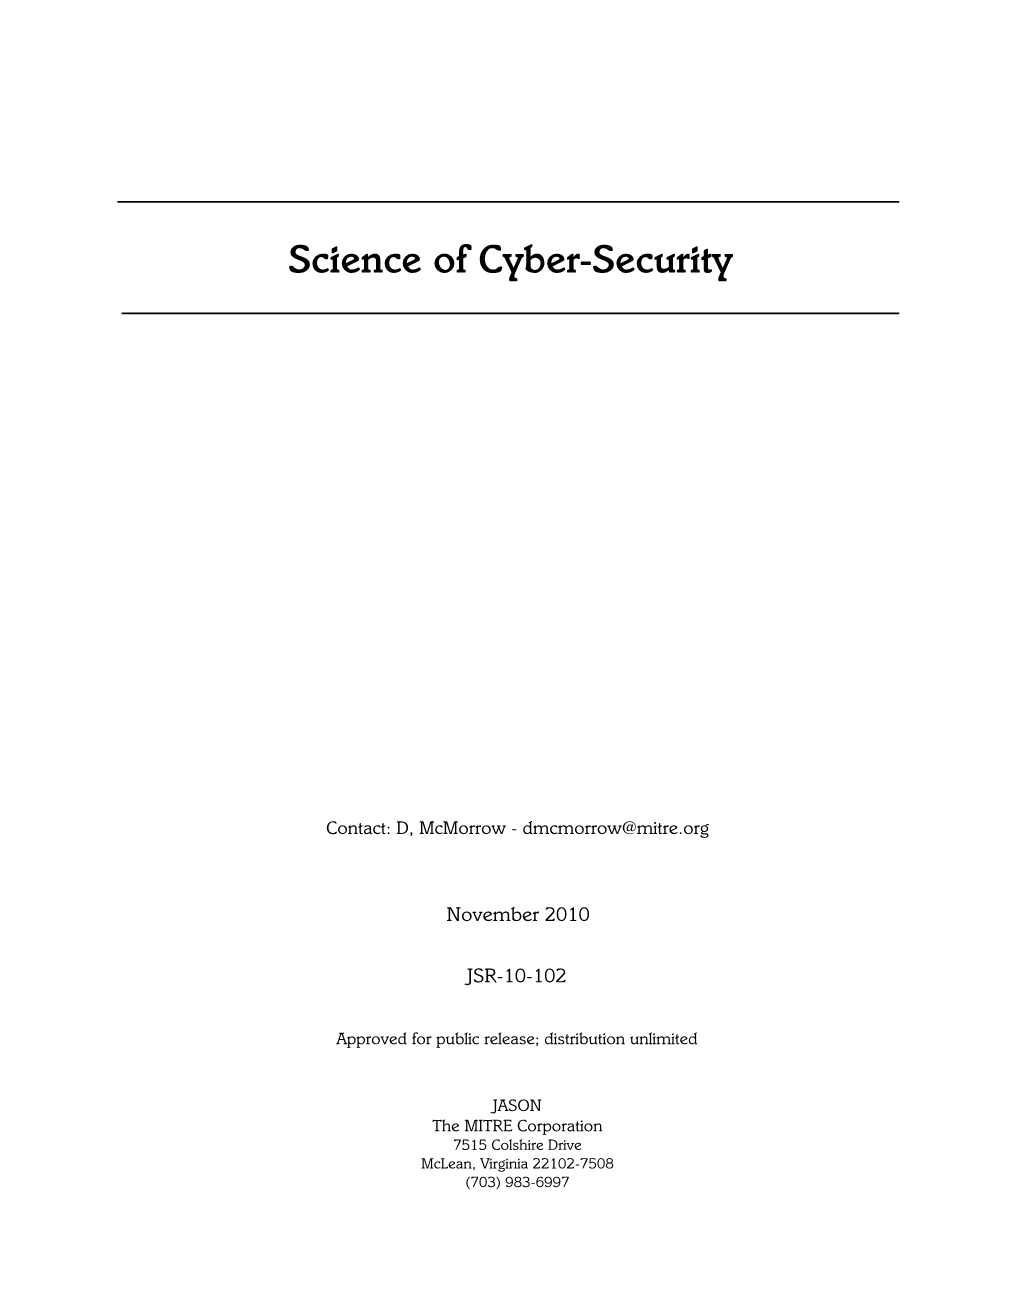 Science of Cyber-Security